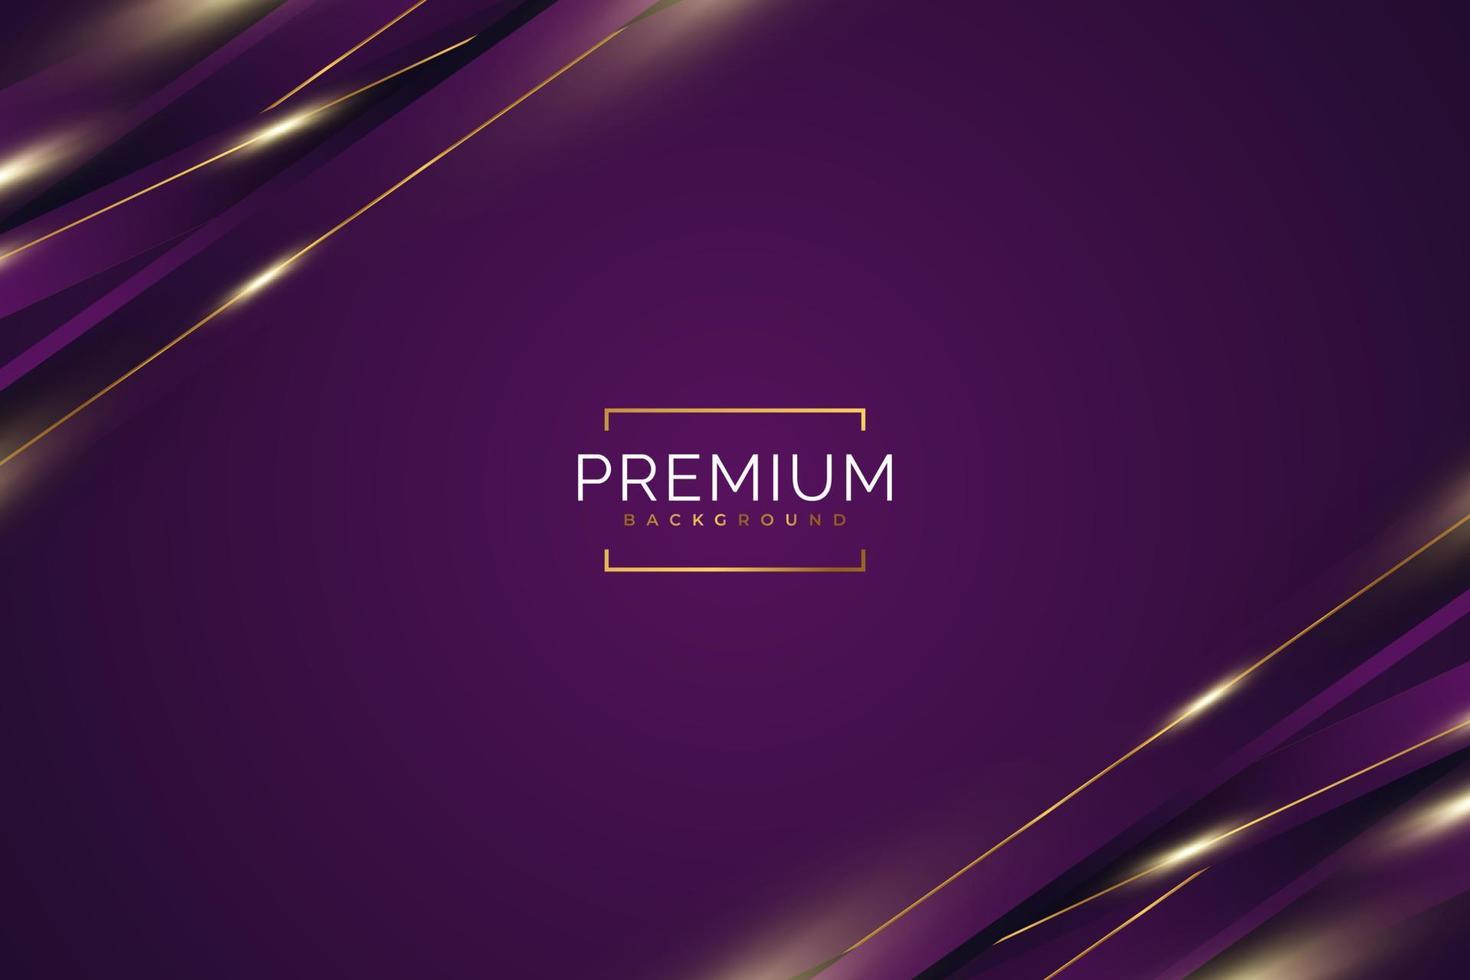 Luxury Purple and Gold Background with Golden Lines and Paper Cut Style. Premium Purple and Gold Background for Award, Nomination, Ceremony, Formal Invitation or Certificate Design vector